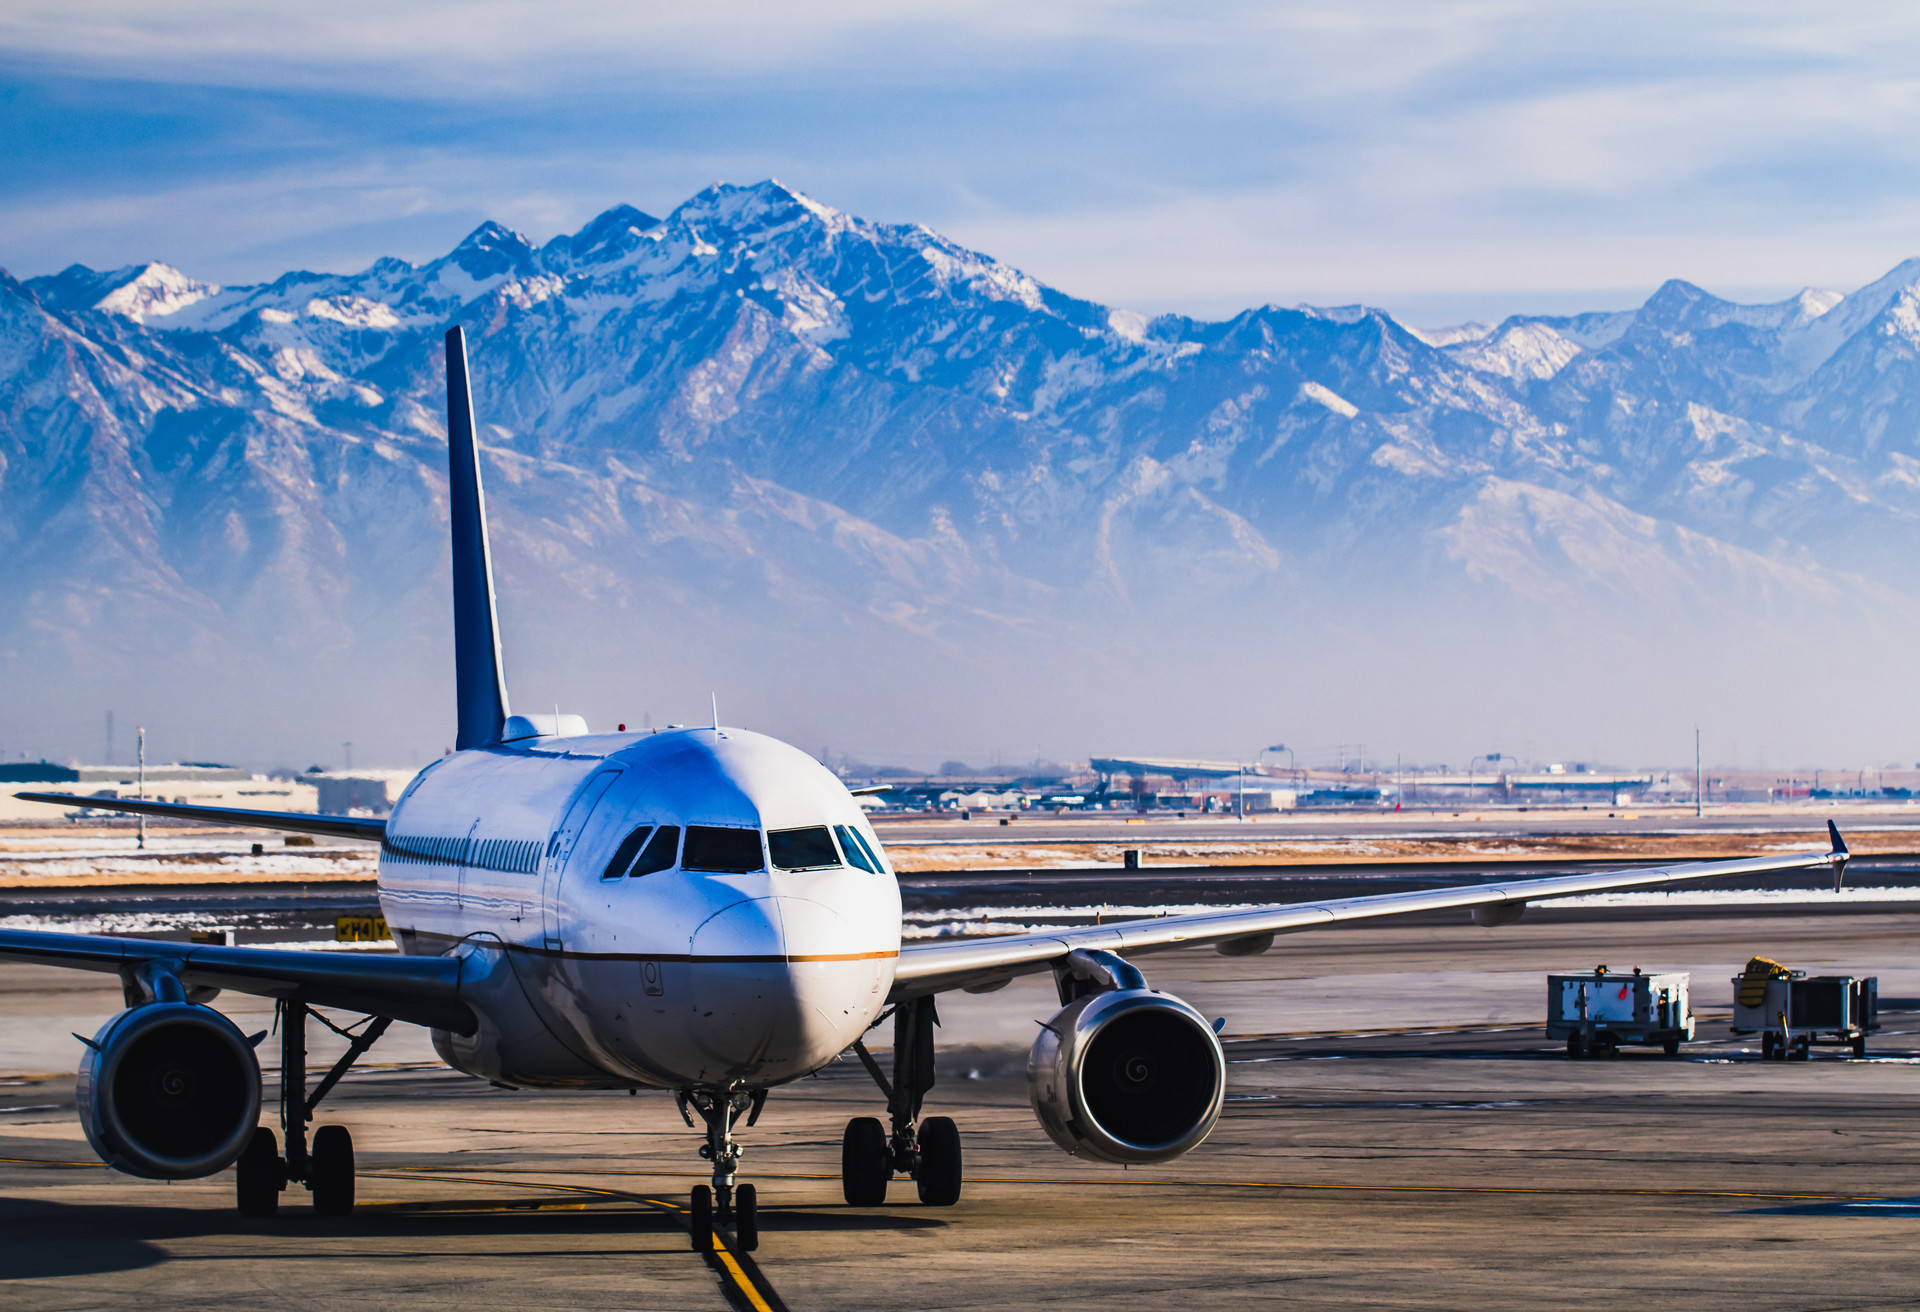 Beautiful view of the snow covered mountains from Salt Lake City whilst in the airport lounge getting ready for departure during winter.  ; Shutterstock ID 1011872626